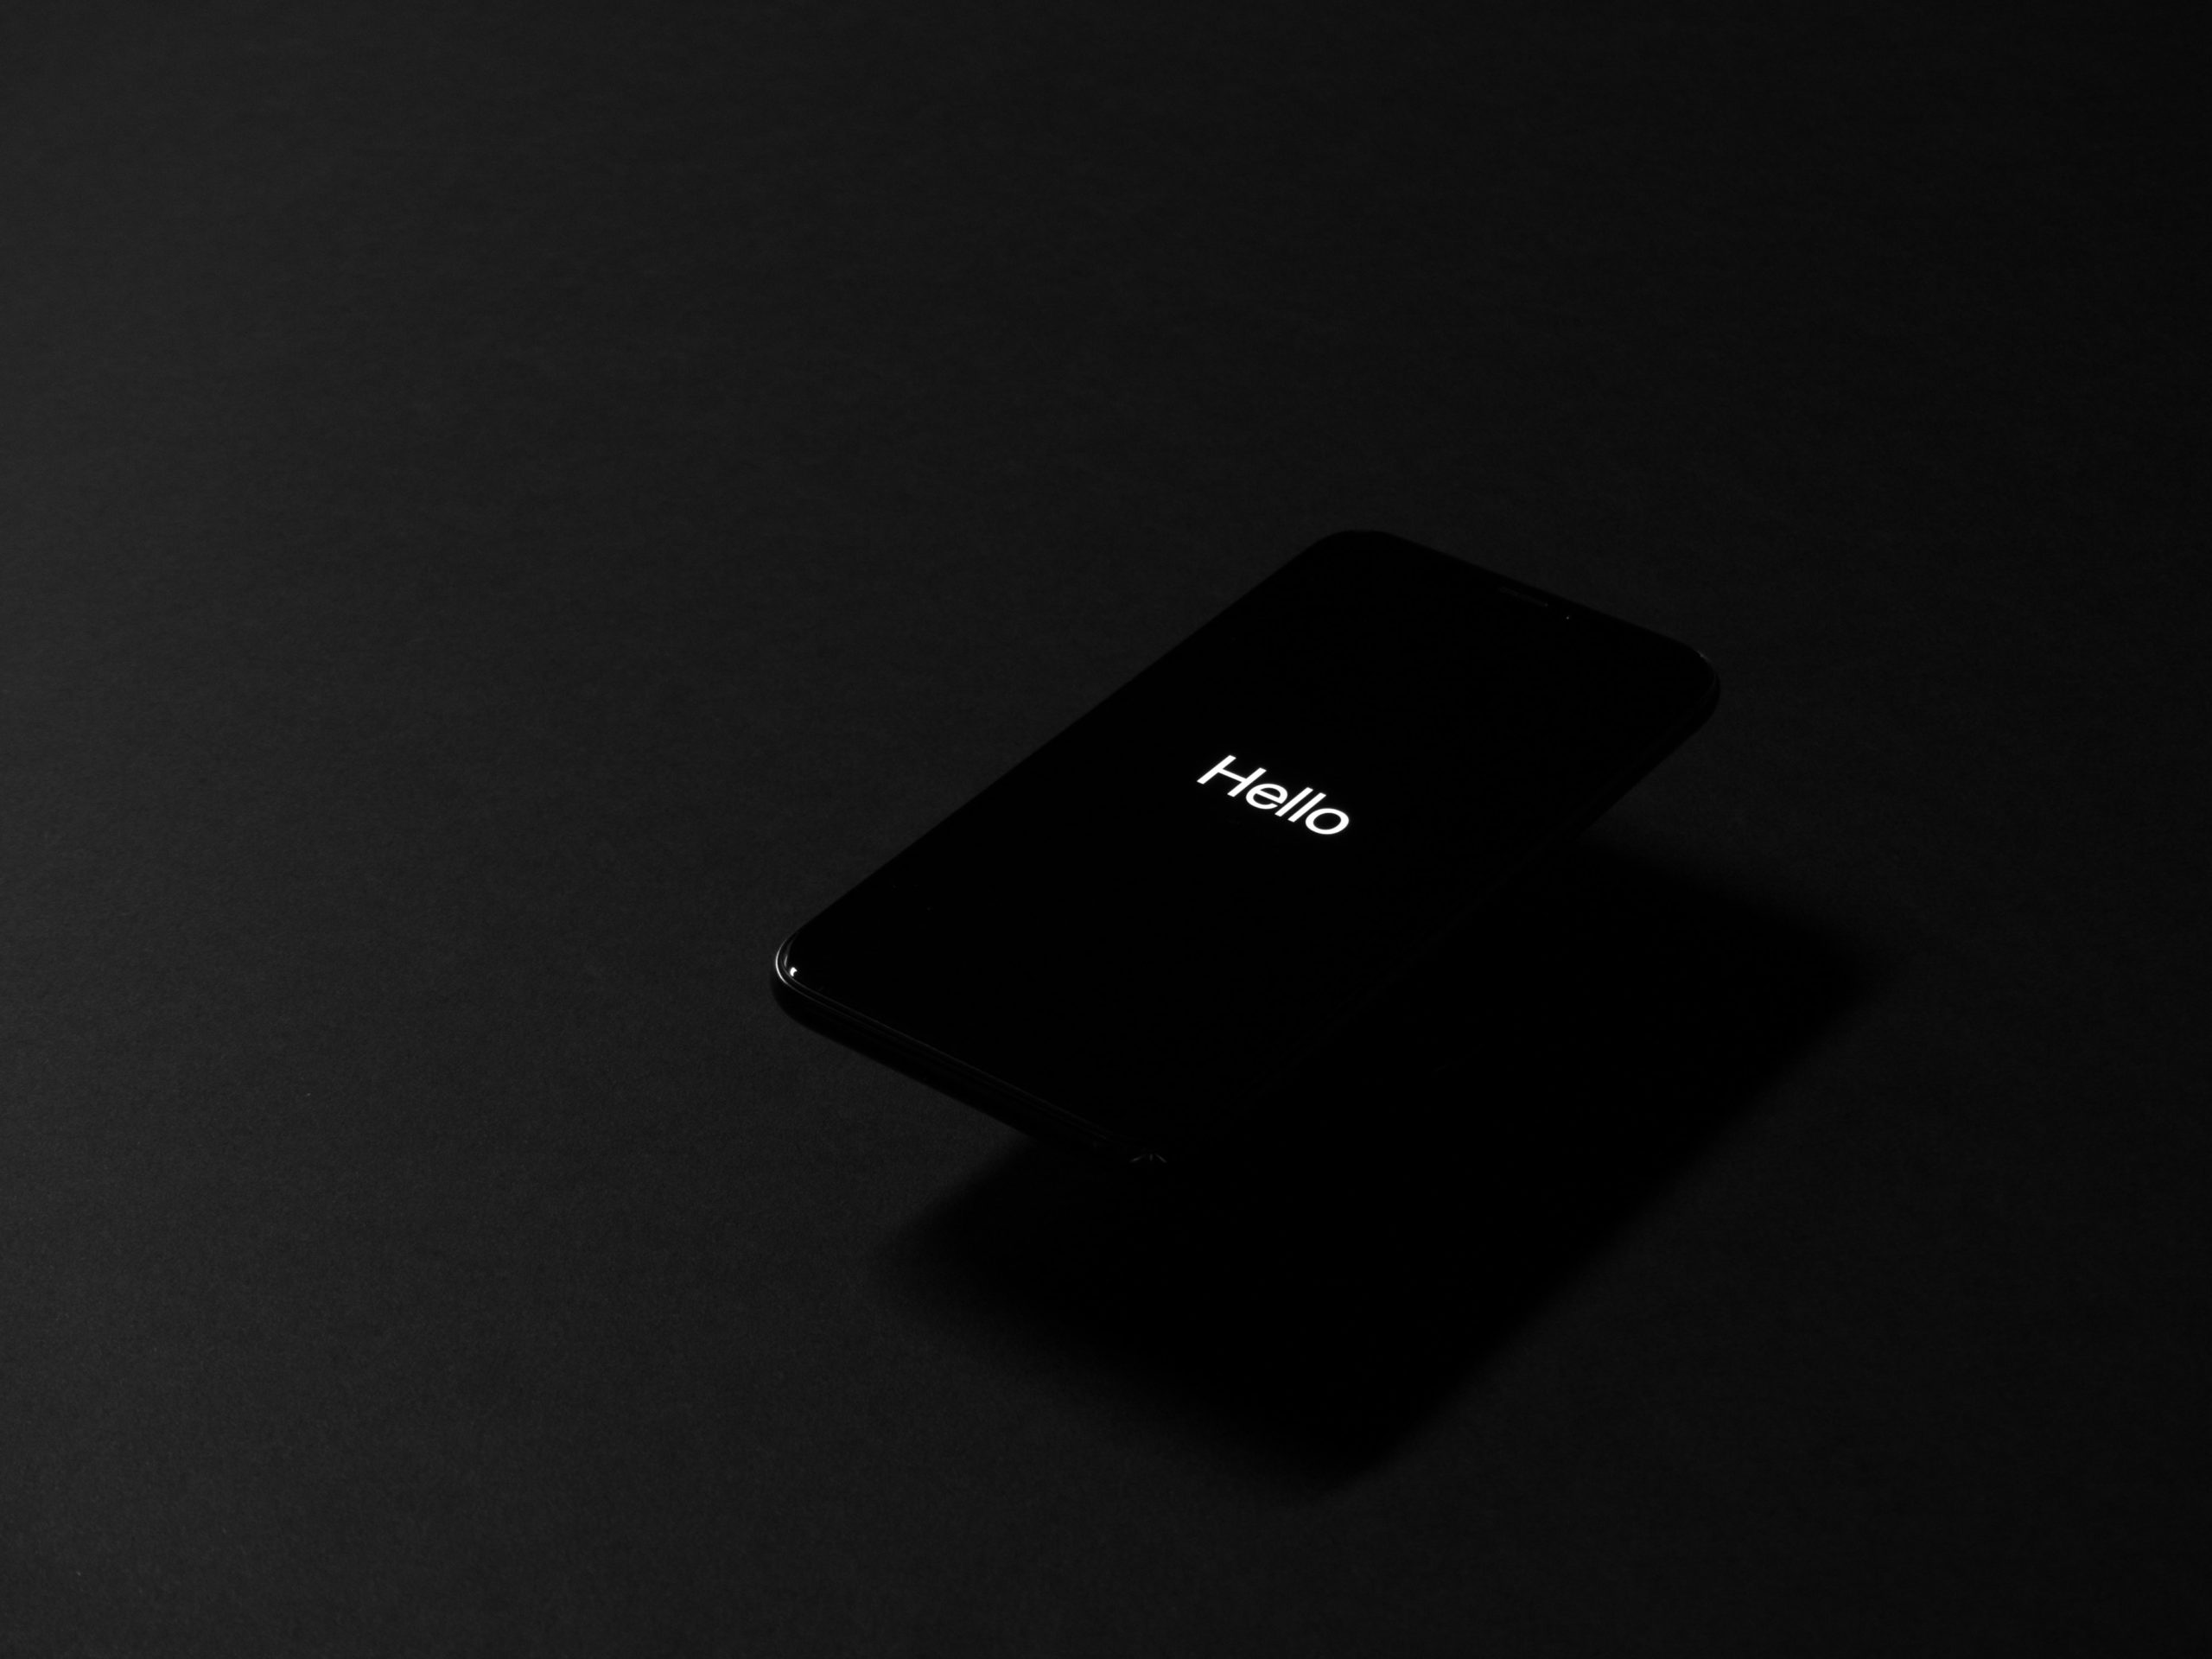 Black background with white type saying "Hello" An example of keeping marketing communications simple.